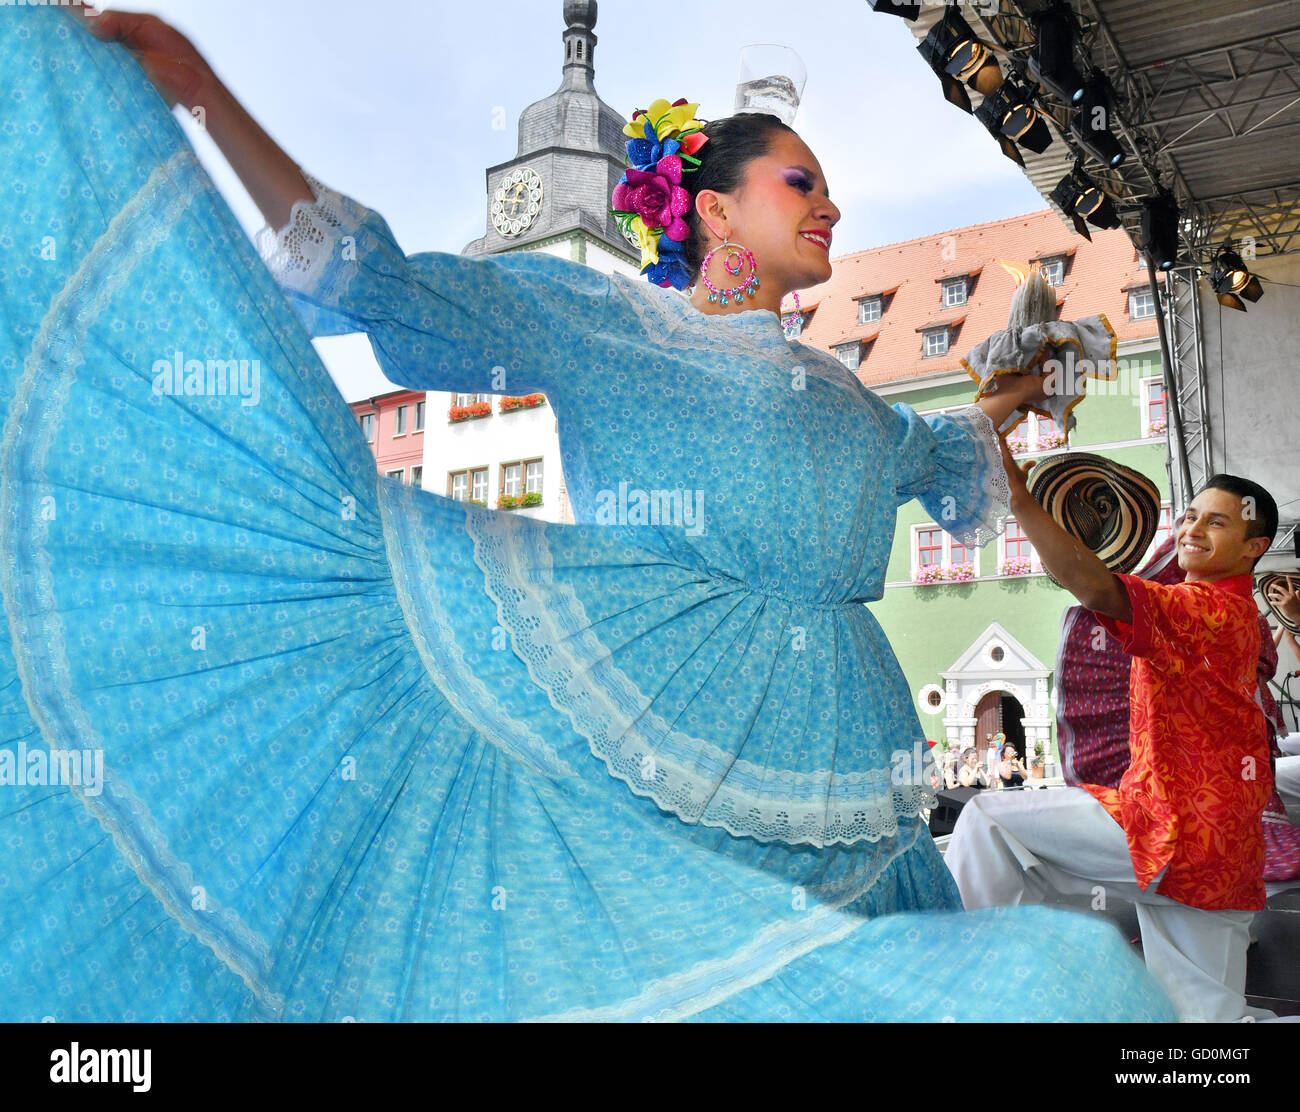 Rudolstadt, Germany. 10th July, 2016. Dancers of Grupo de Baile Otrora Boyaca from Colombia performing at the Marktplatz for the Rudolstadt Festival 2016 in Rudolstadt, Germany, 10 July 2016. The ogranisors estimate around 90 000 visitors have visited Germany's biggest festival of folk and world music in Rudolstadt. Since 07 July more than 300 concerts and workshops from artists from more than 40 countries have taken place over more than 20 platforms. Photo: MARTIN SCHUTT/dpa/Alamy Live News Stock Photo